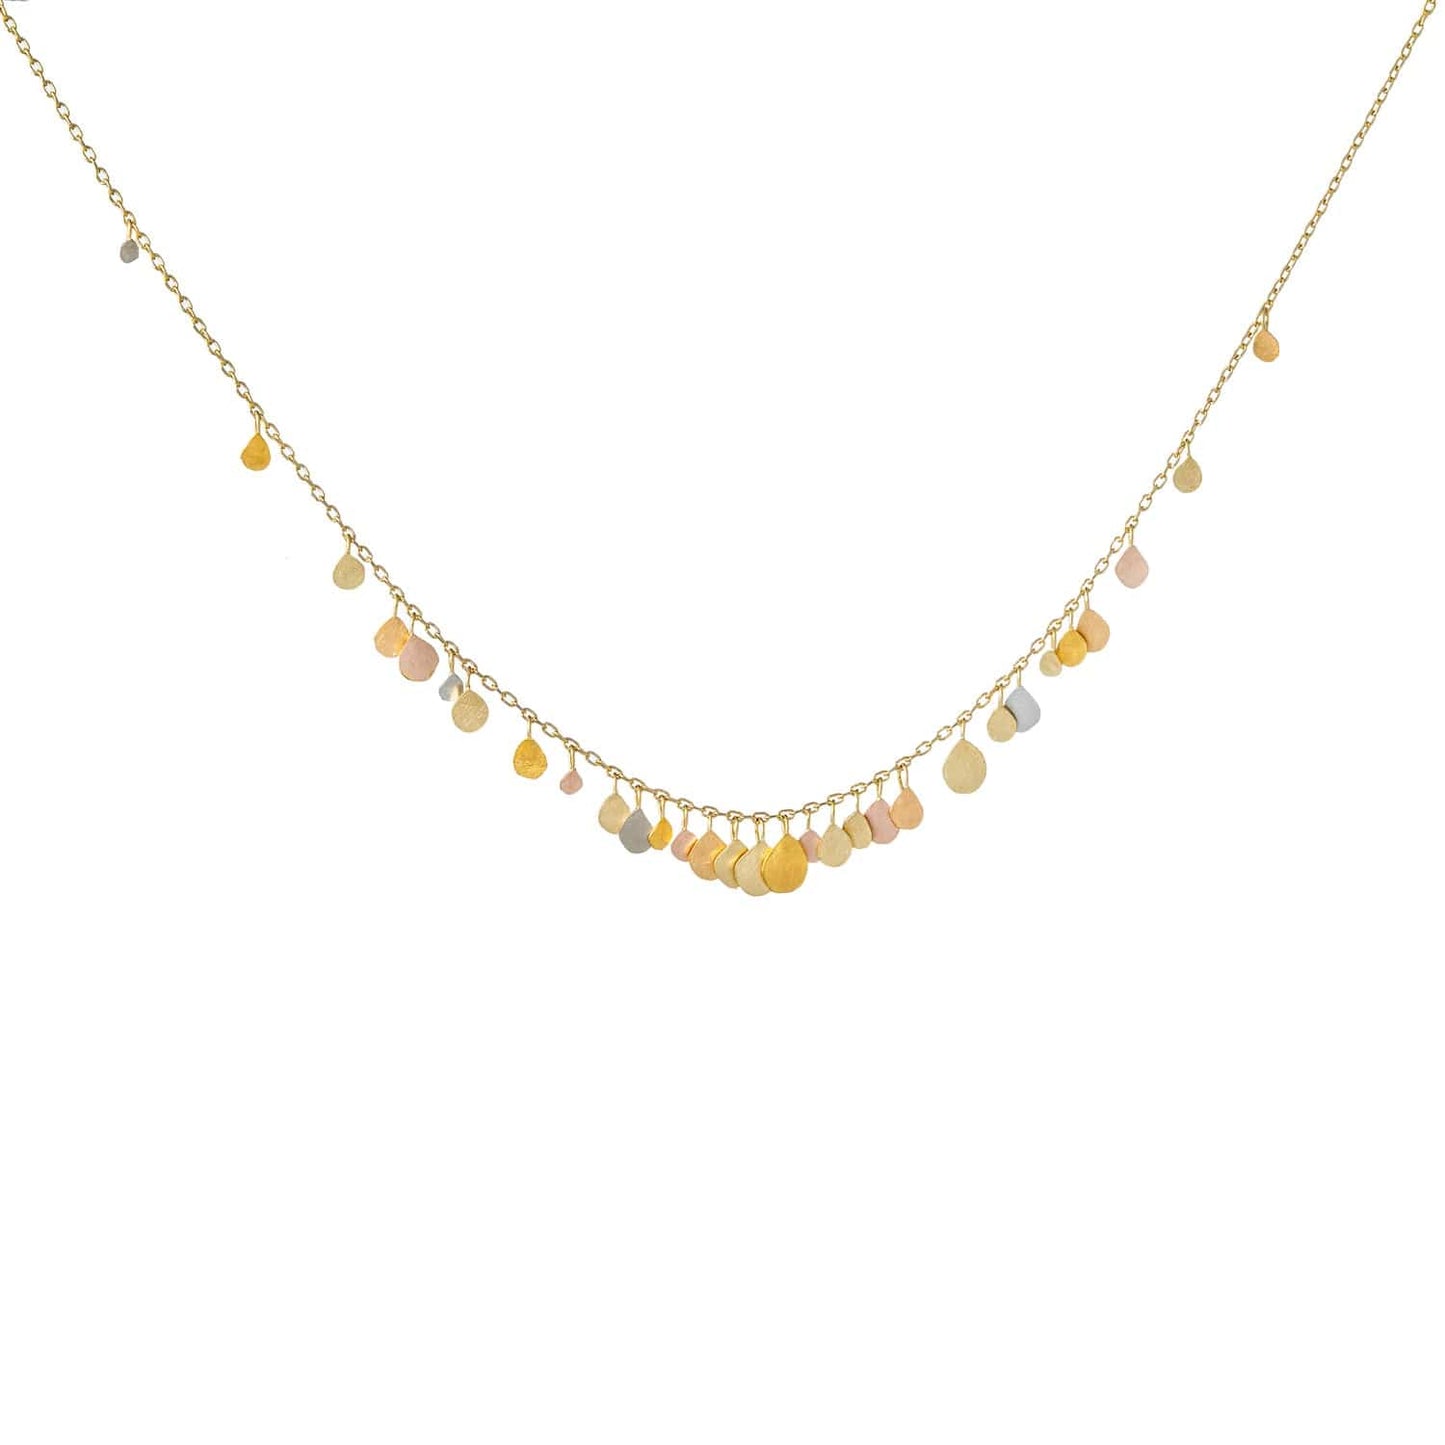 NKL-18K 18k Yellow Gold & Rainbow Gold Birdsong Necklace